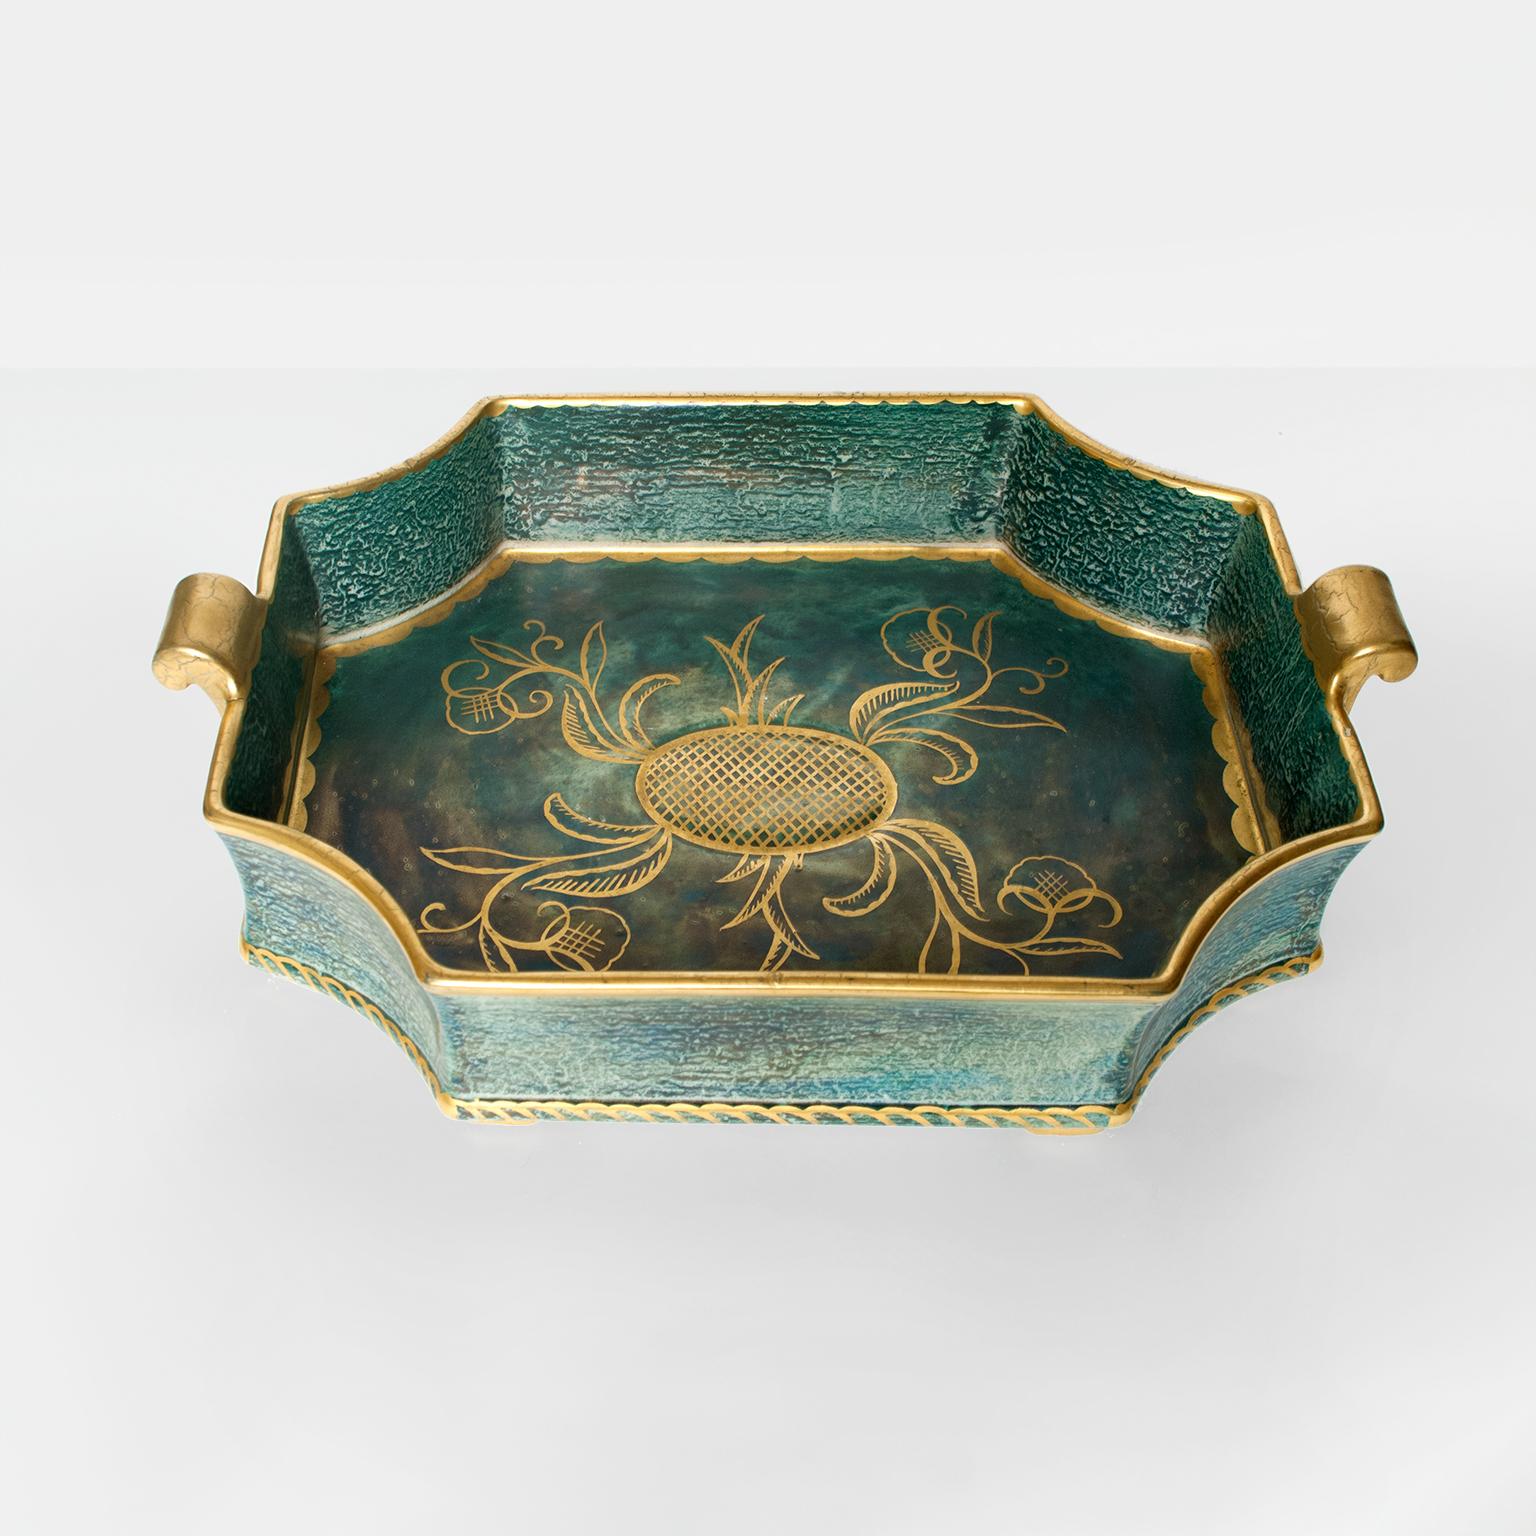 Large Swedish Art Deco tray or bowl with notched corners and handles. Hand decorated with gold glaze over a blue and green luster glaze. Designed by Josef Ekberg for Gustavsberg, signed and dated 1929.